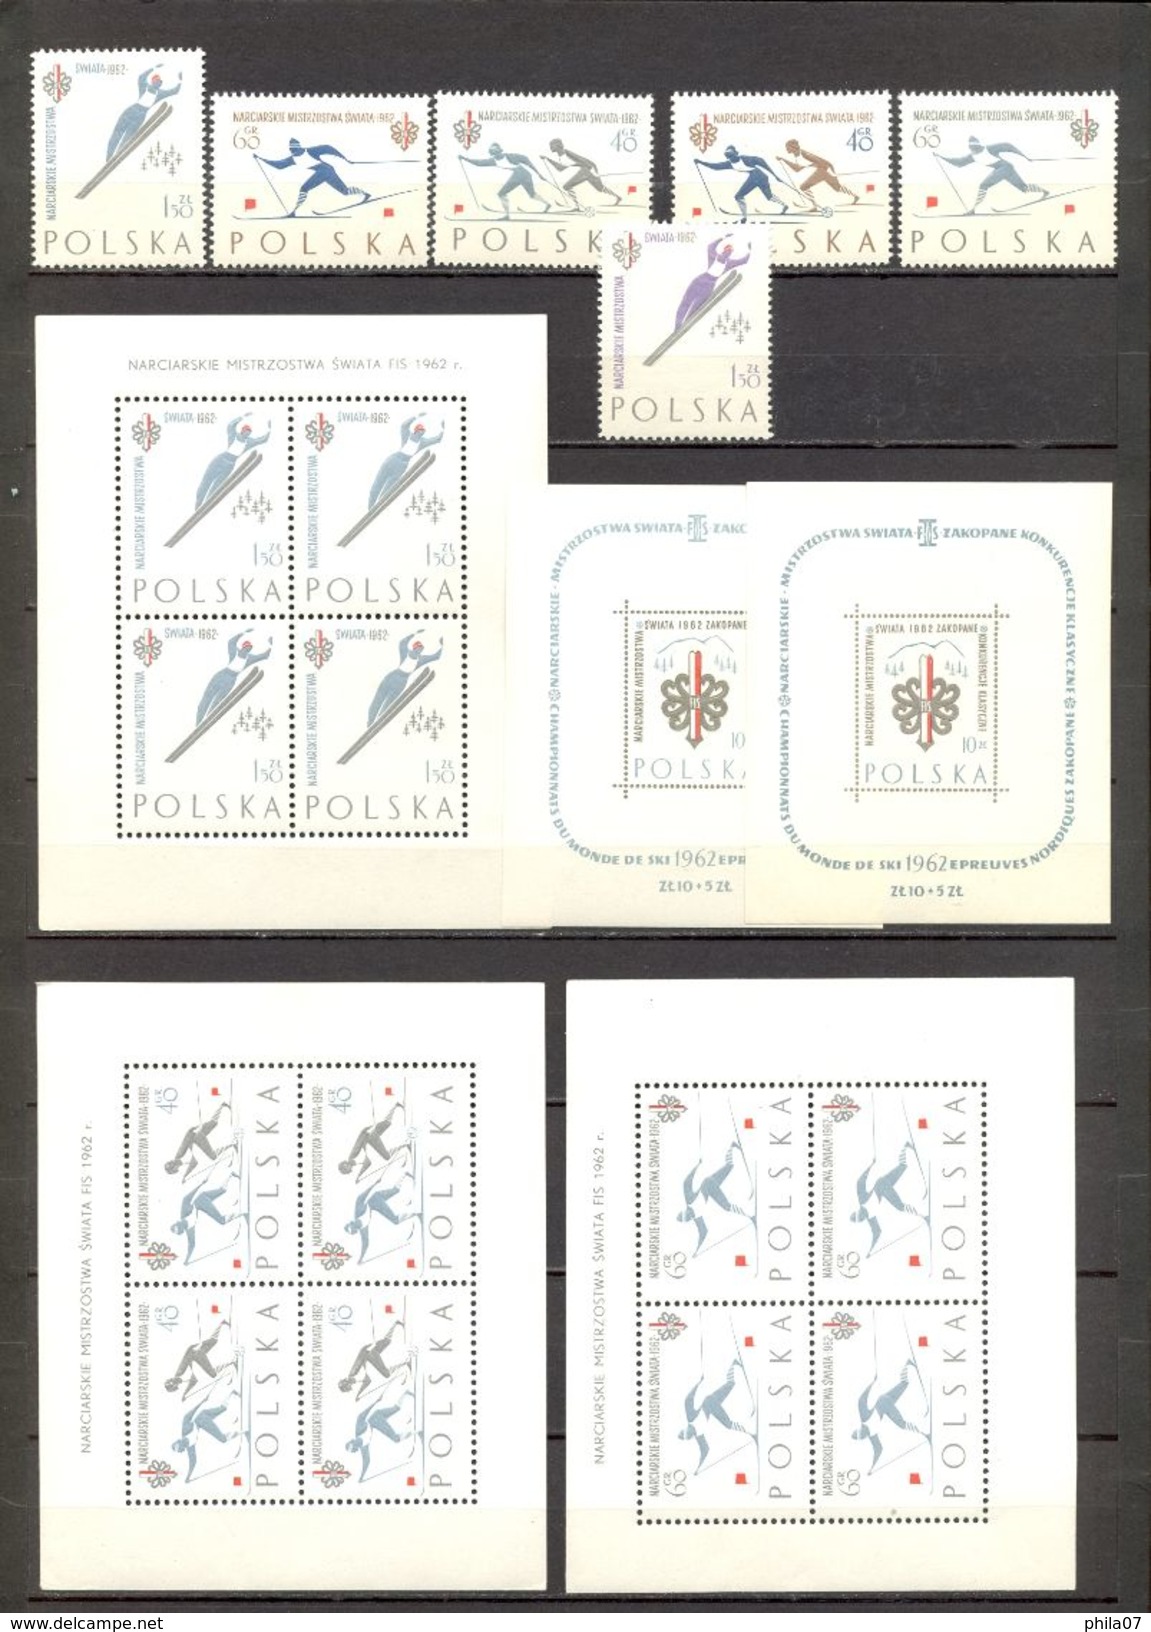 Poland - 1962, SWIATA FIS, Two Blocks, Sheet And Series, All MNH. / See Scans, 5 Scans - Nuovi